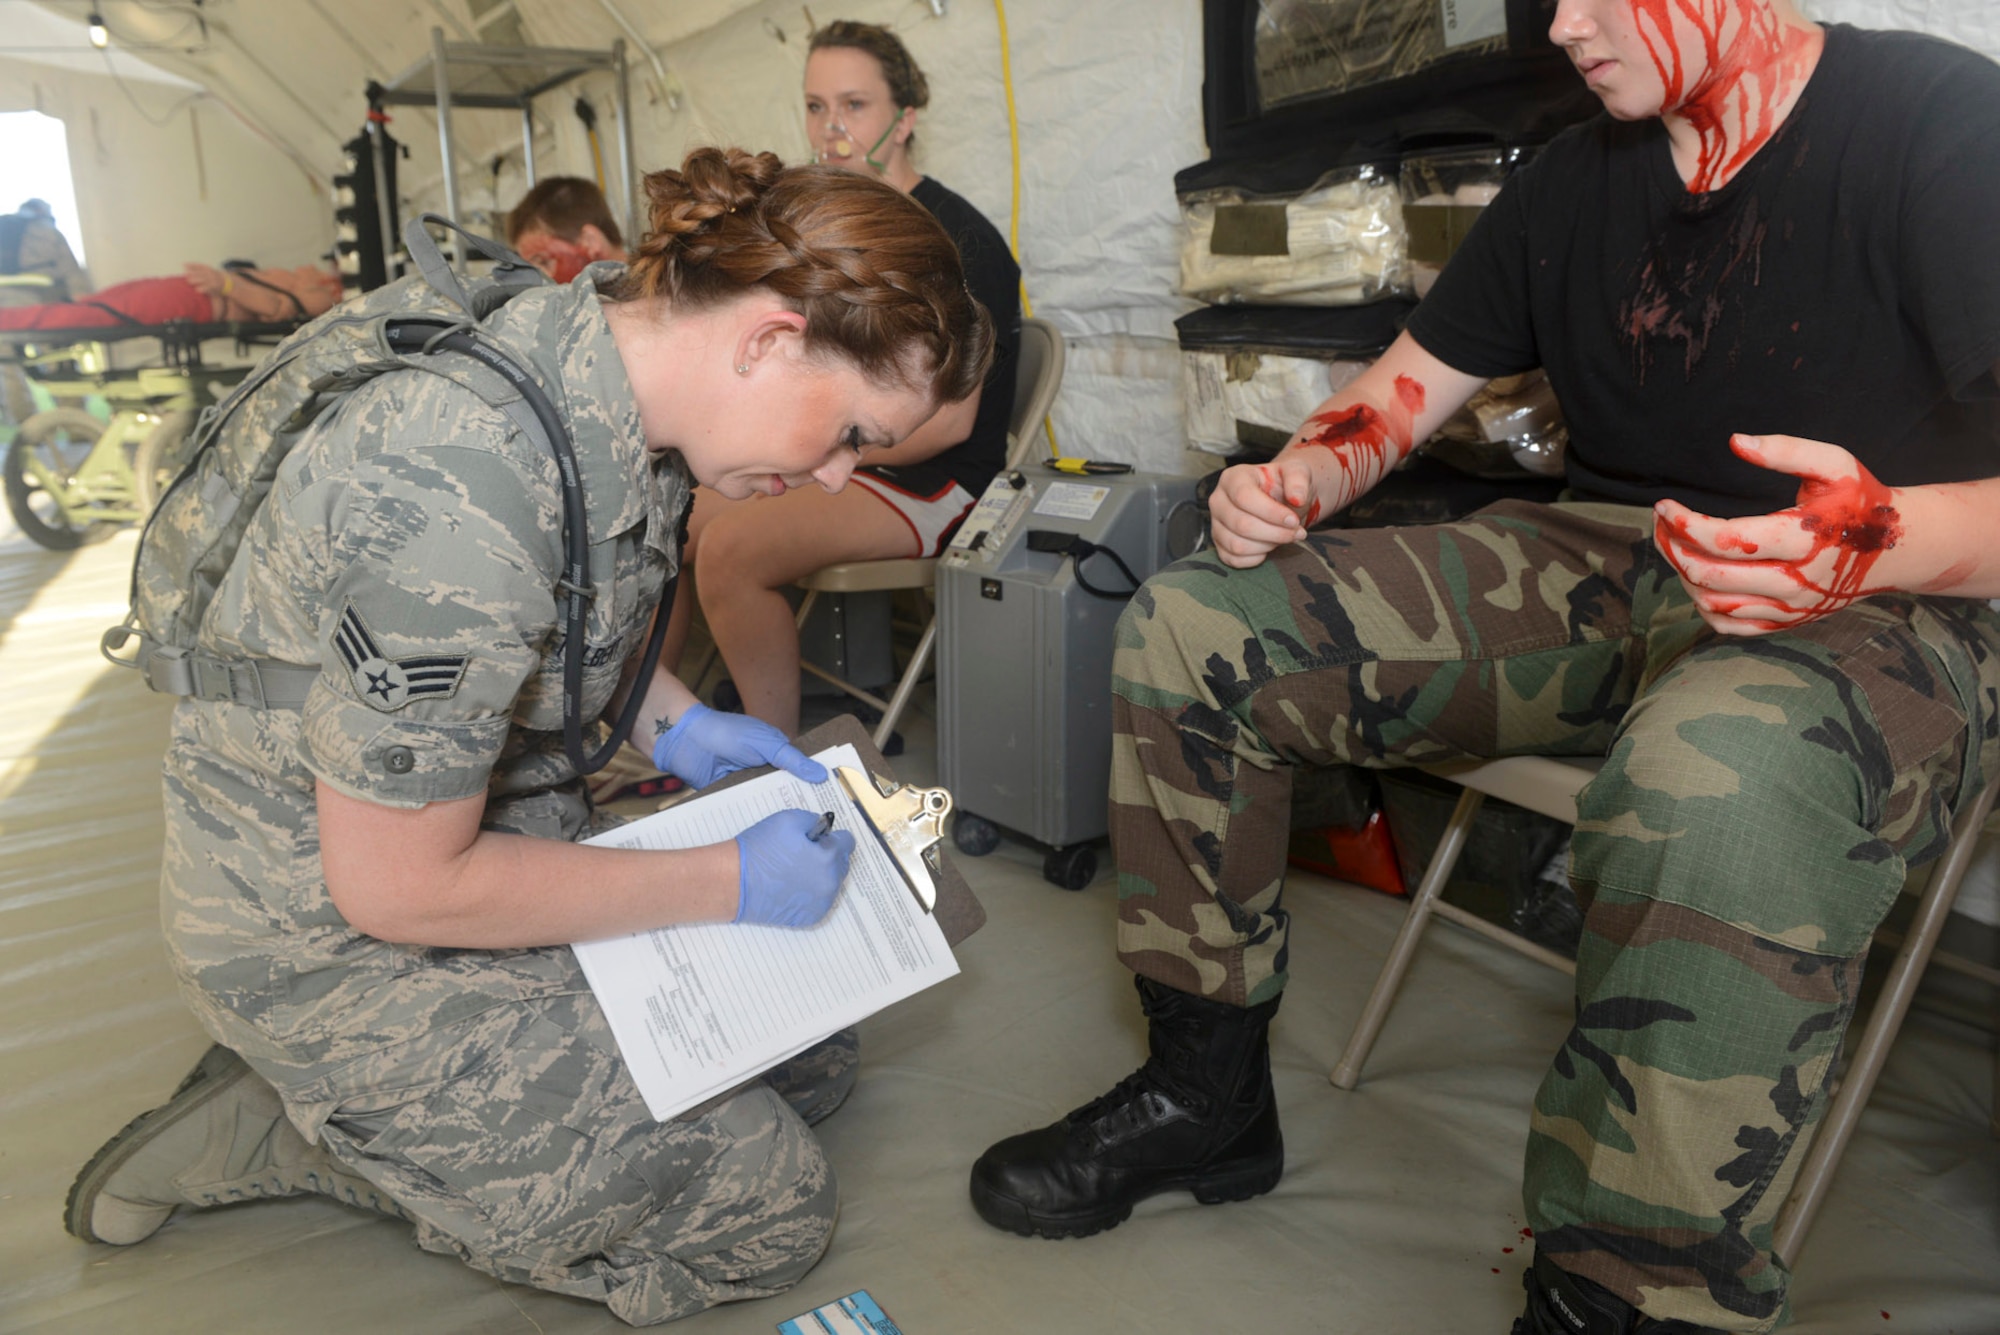 U.S. Air National Guard Senior Airman Jamison Tolbert, medical technician, 136th Medical Group, records casualty information during a mass casualty exercise at Naval Air Station Fort Worth, Joint Reserve Base, Texas, June 23, 2013. The mass casualty exercise is conducted annually to assess the readiness of the 136th Medical Group’s ability to engage in actual disaster relief. (Air National Guard photo by Master Sgt. Charles Hatton/released)